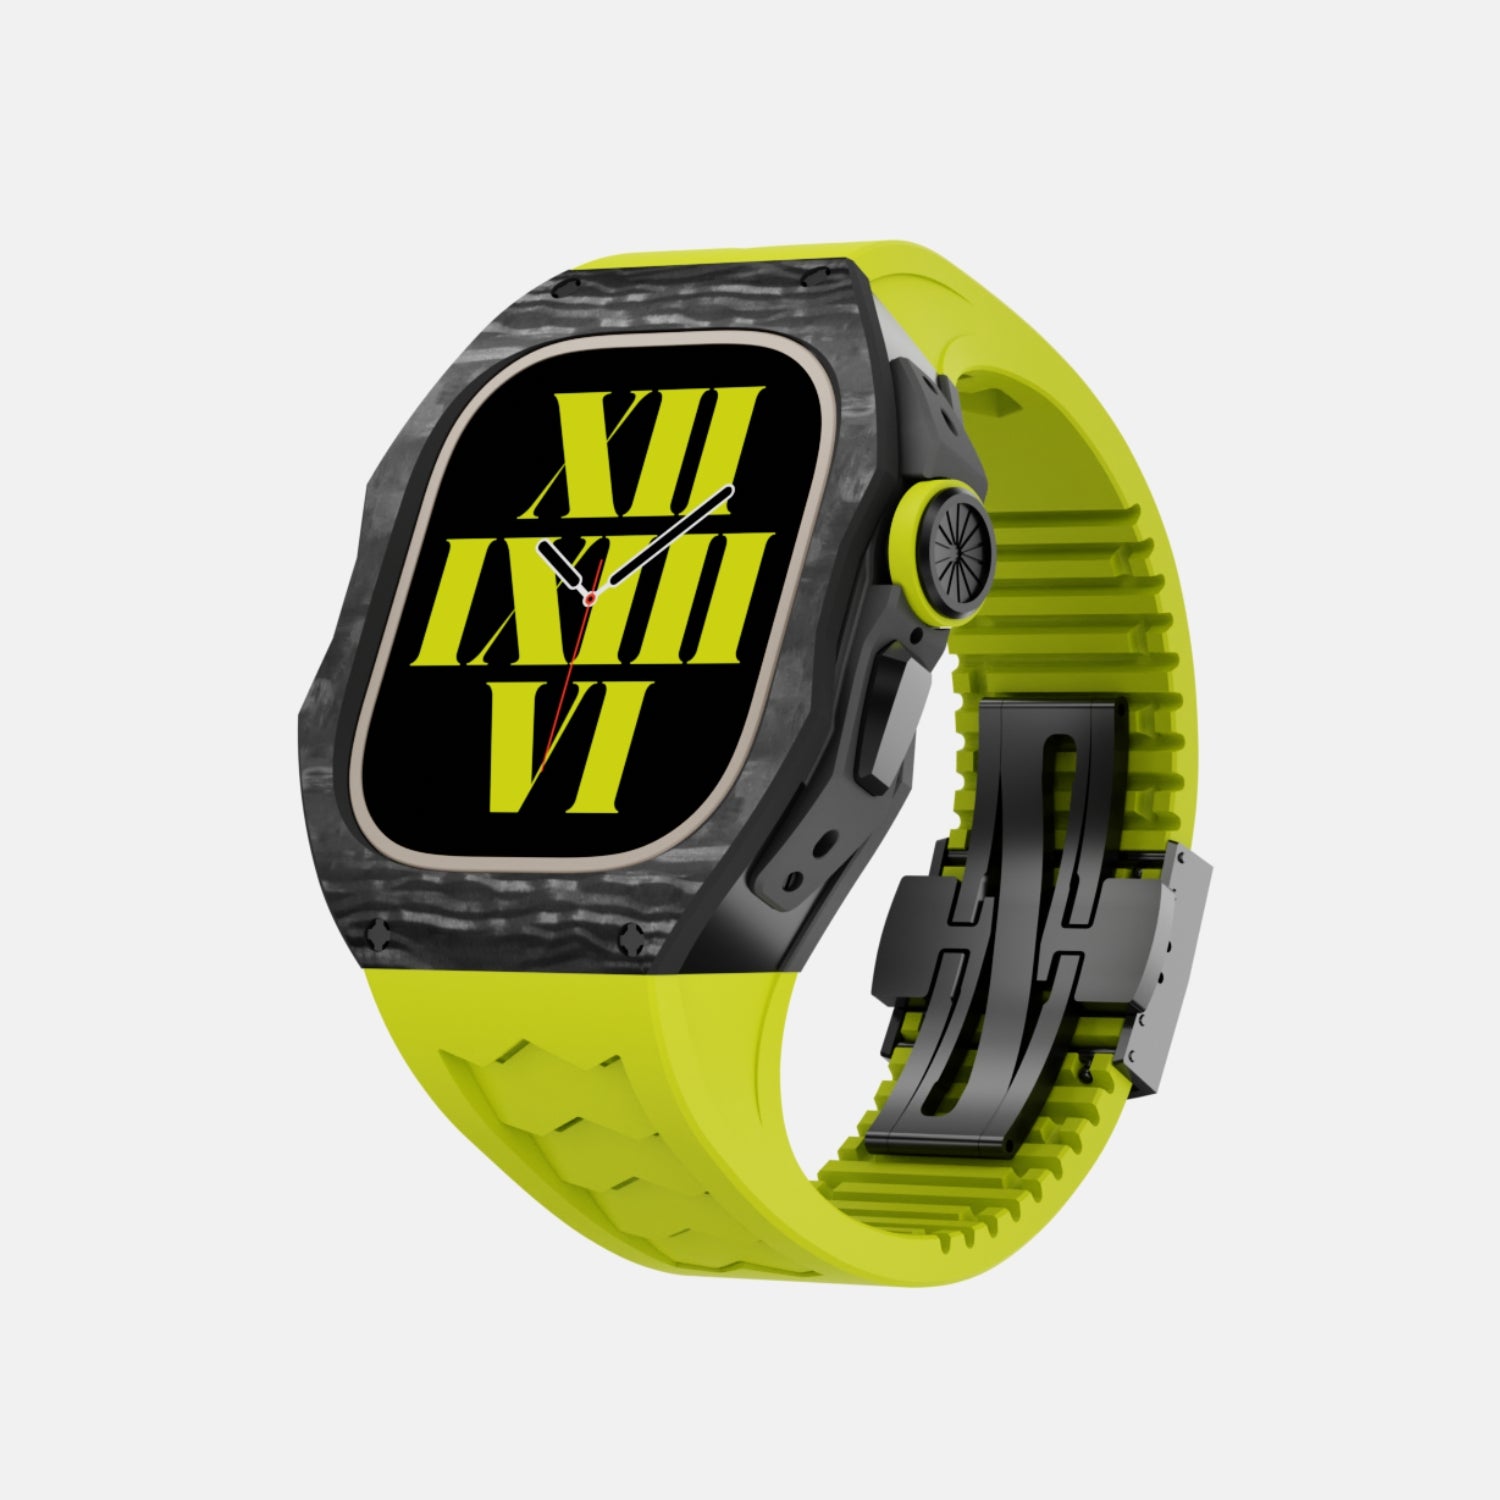 Fluoro Rubber Strap of Carbon Fiber Edition Case 49MM- Gold Buckle